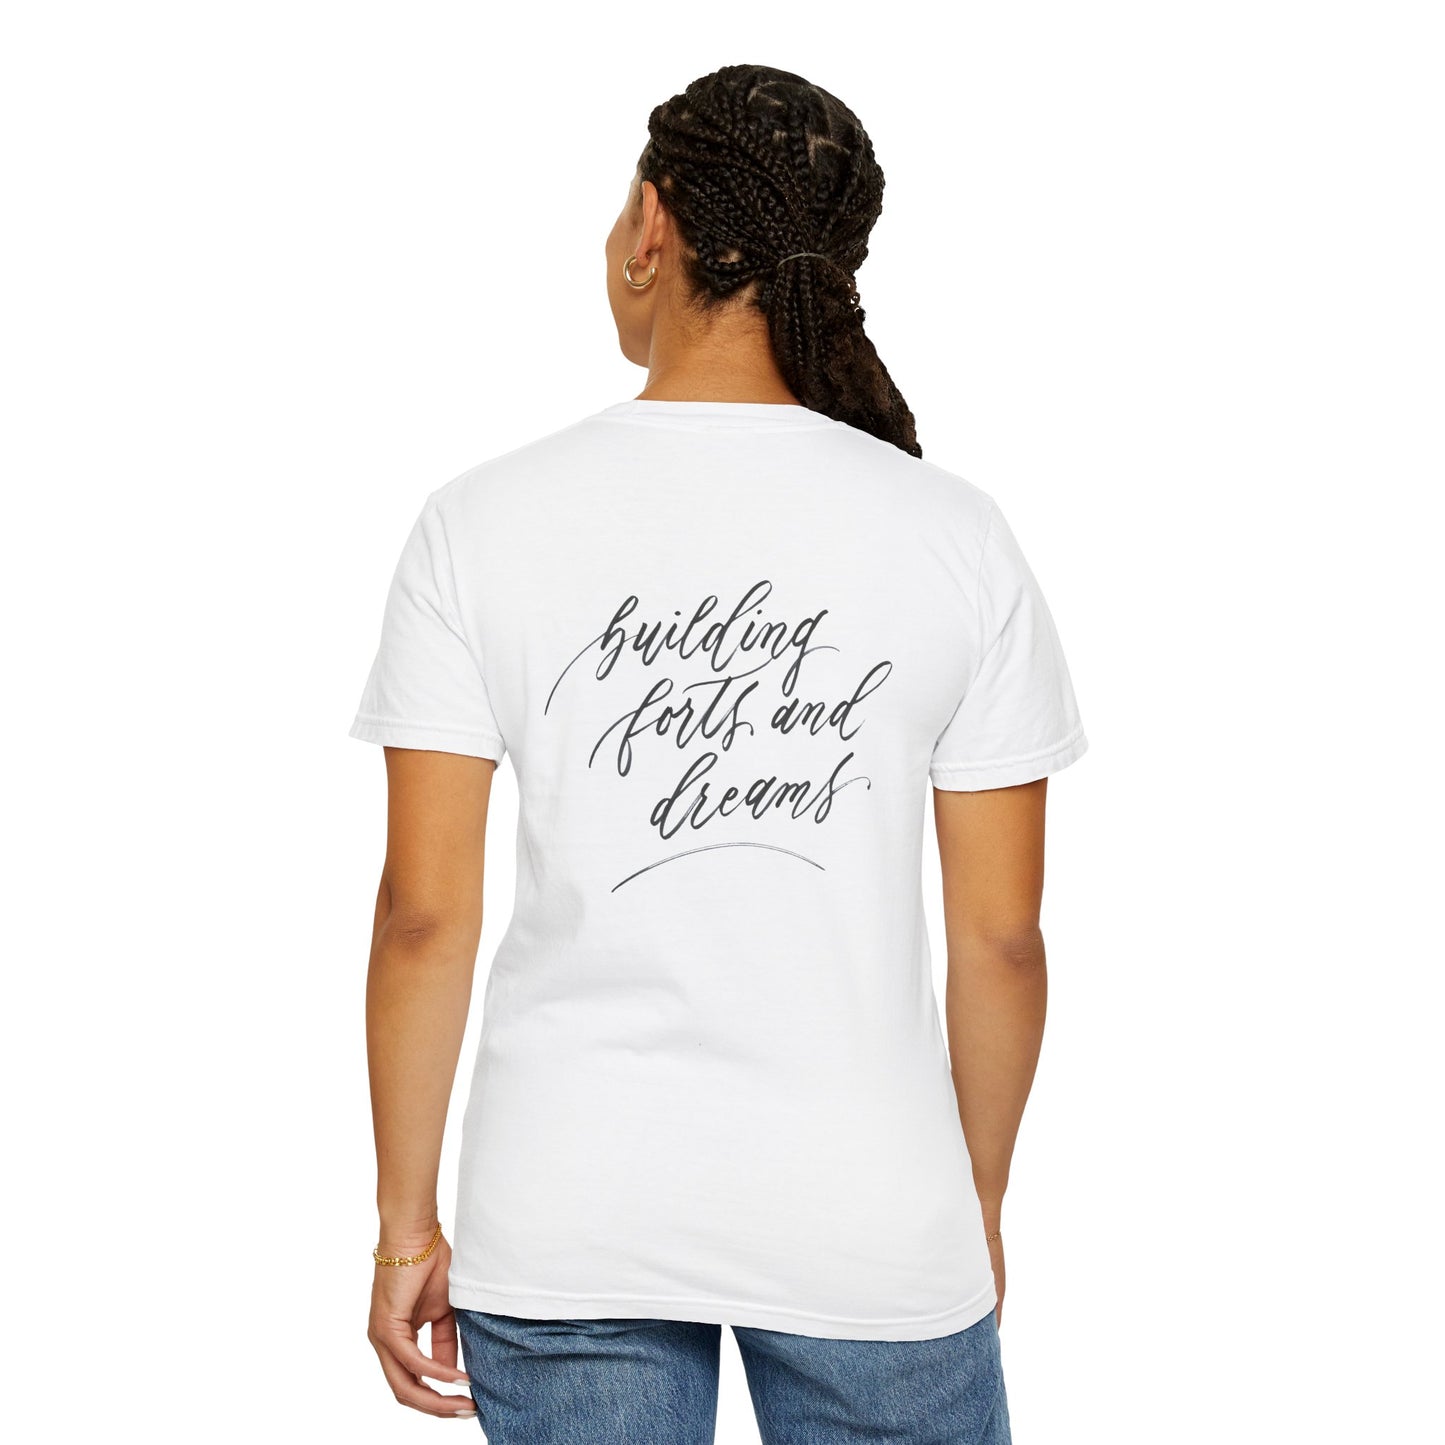 Script "Mama" Front & "Building Forts & Dreams" Calligraphy Back - Unisex High Quality 100% Cotton T-shirt - Mom & Dad Shirts #03